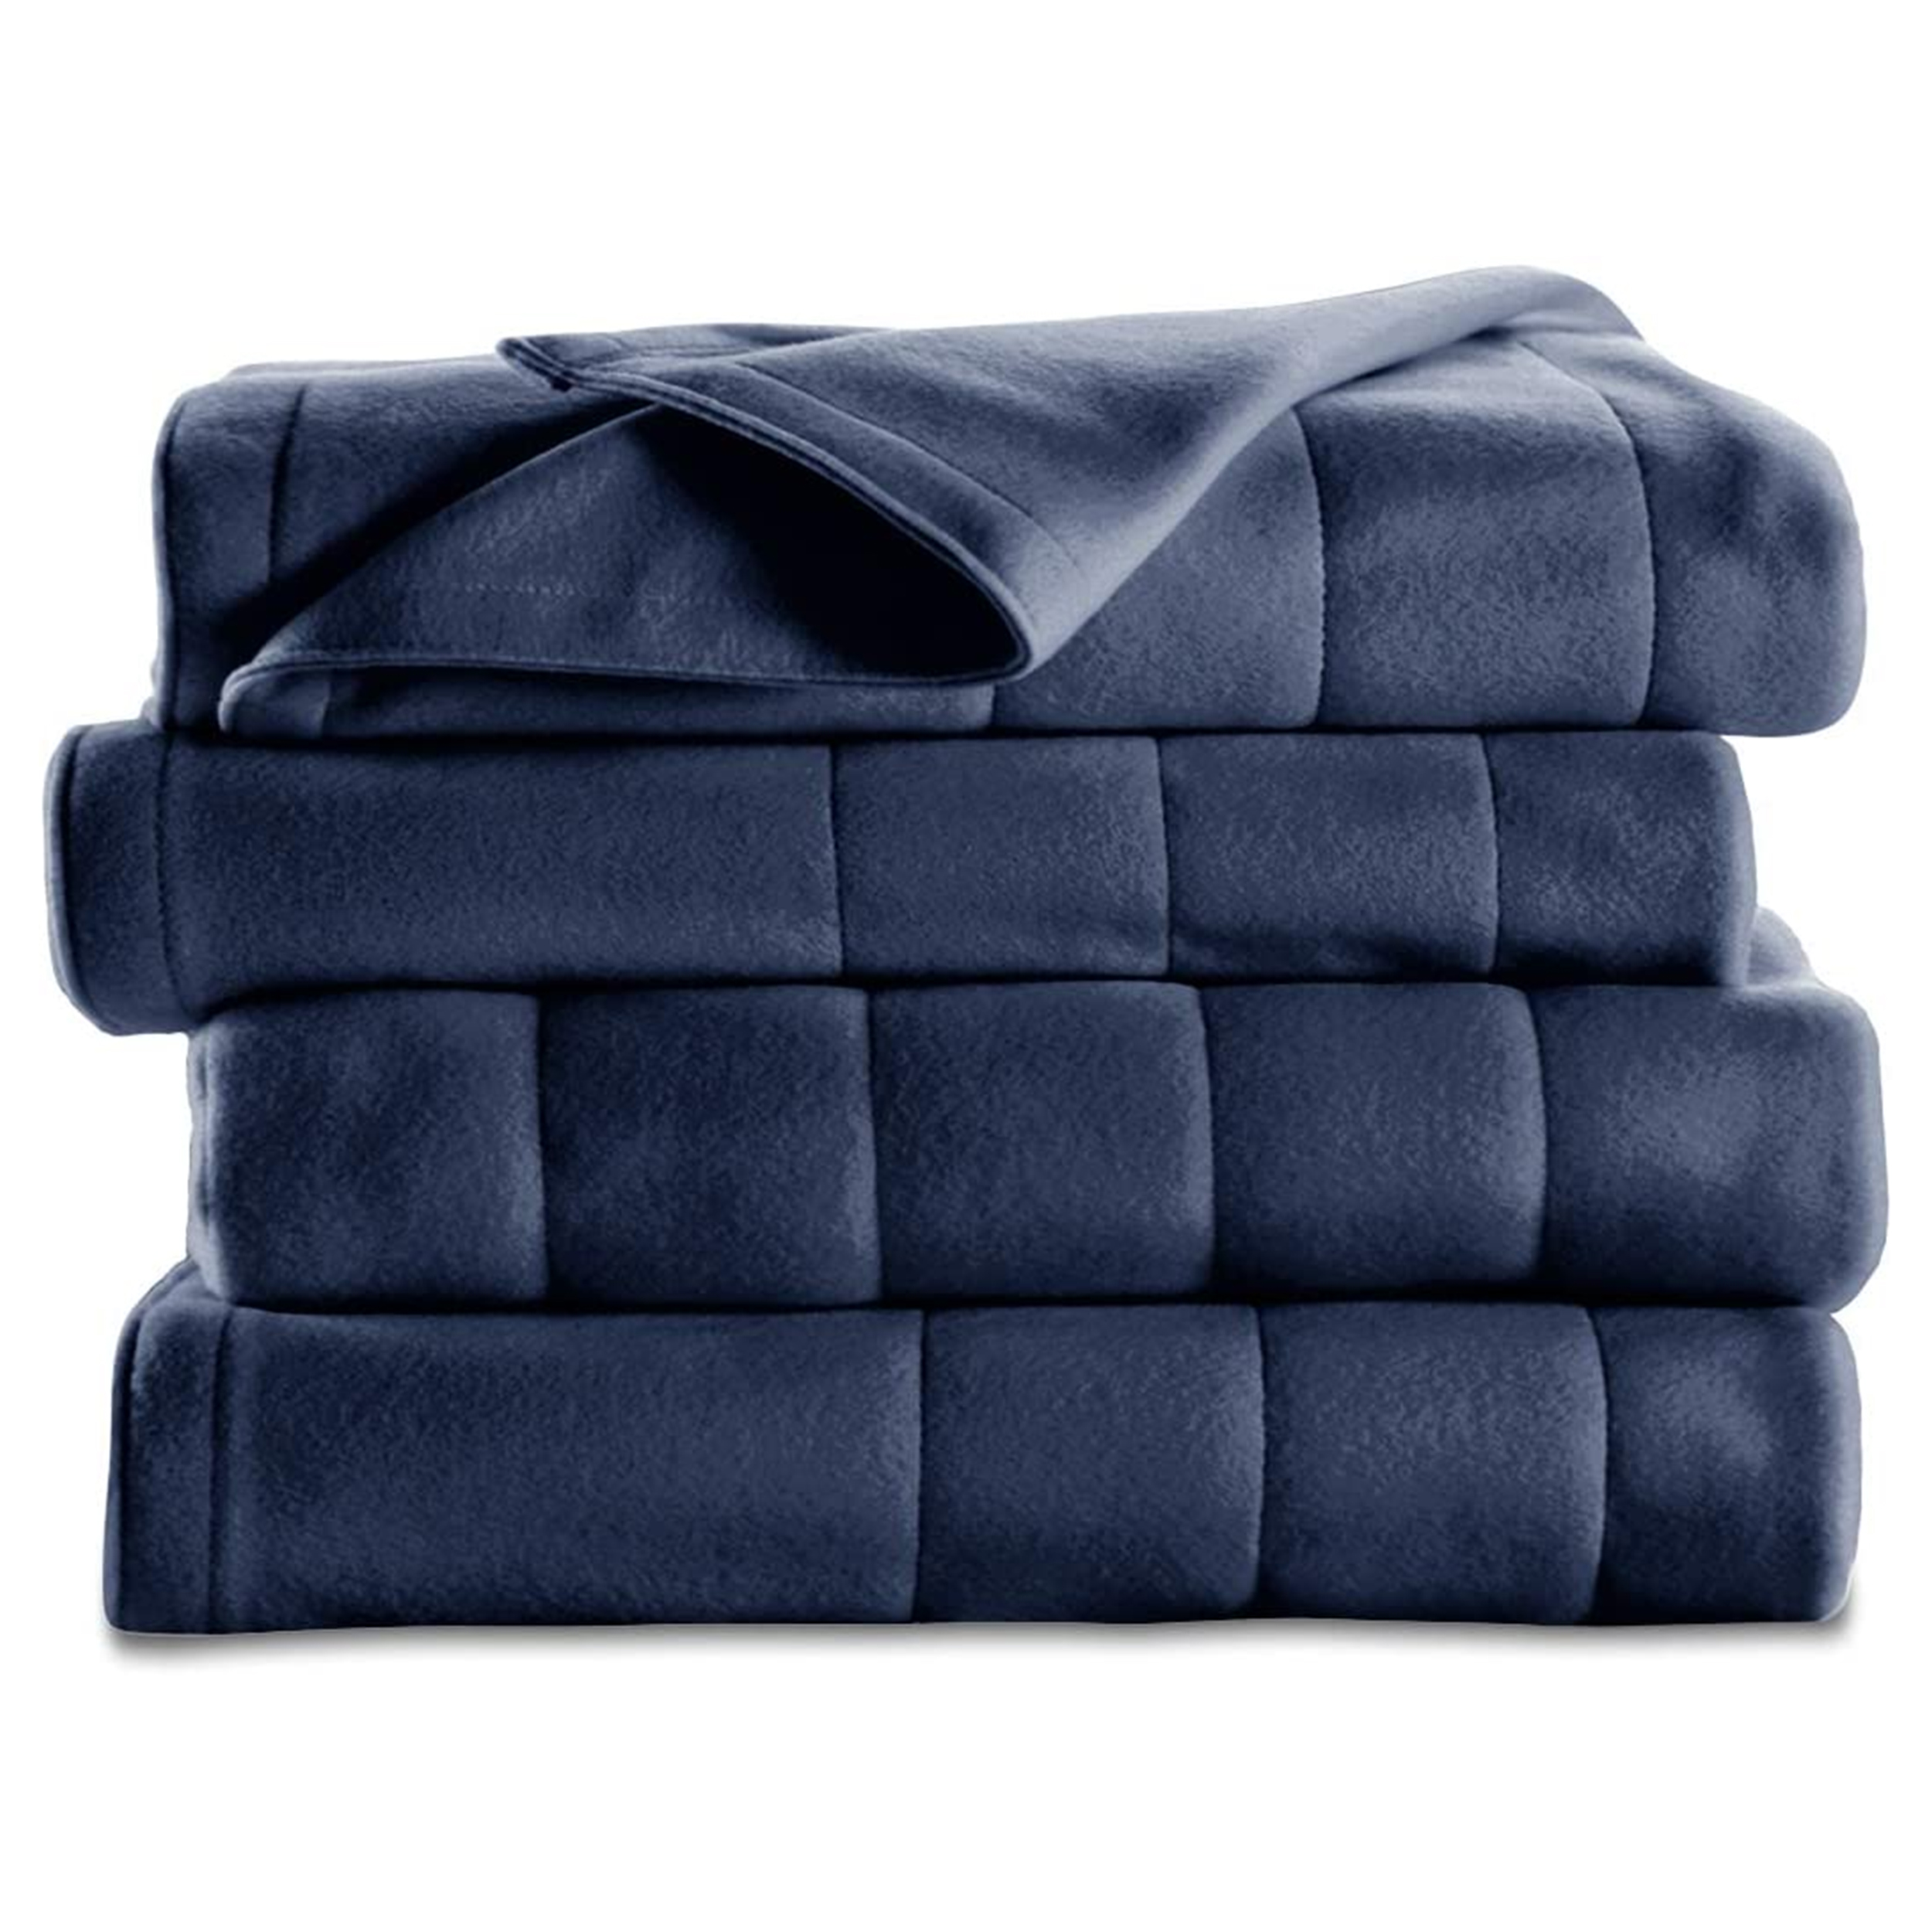 Sunbeam Full Electric Heated Fleece Blanket in Blue with Dial Control